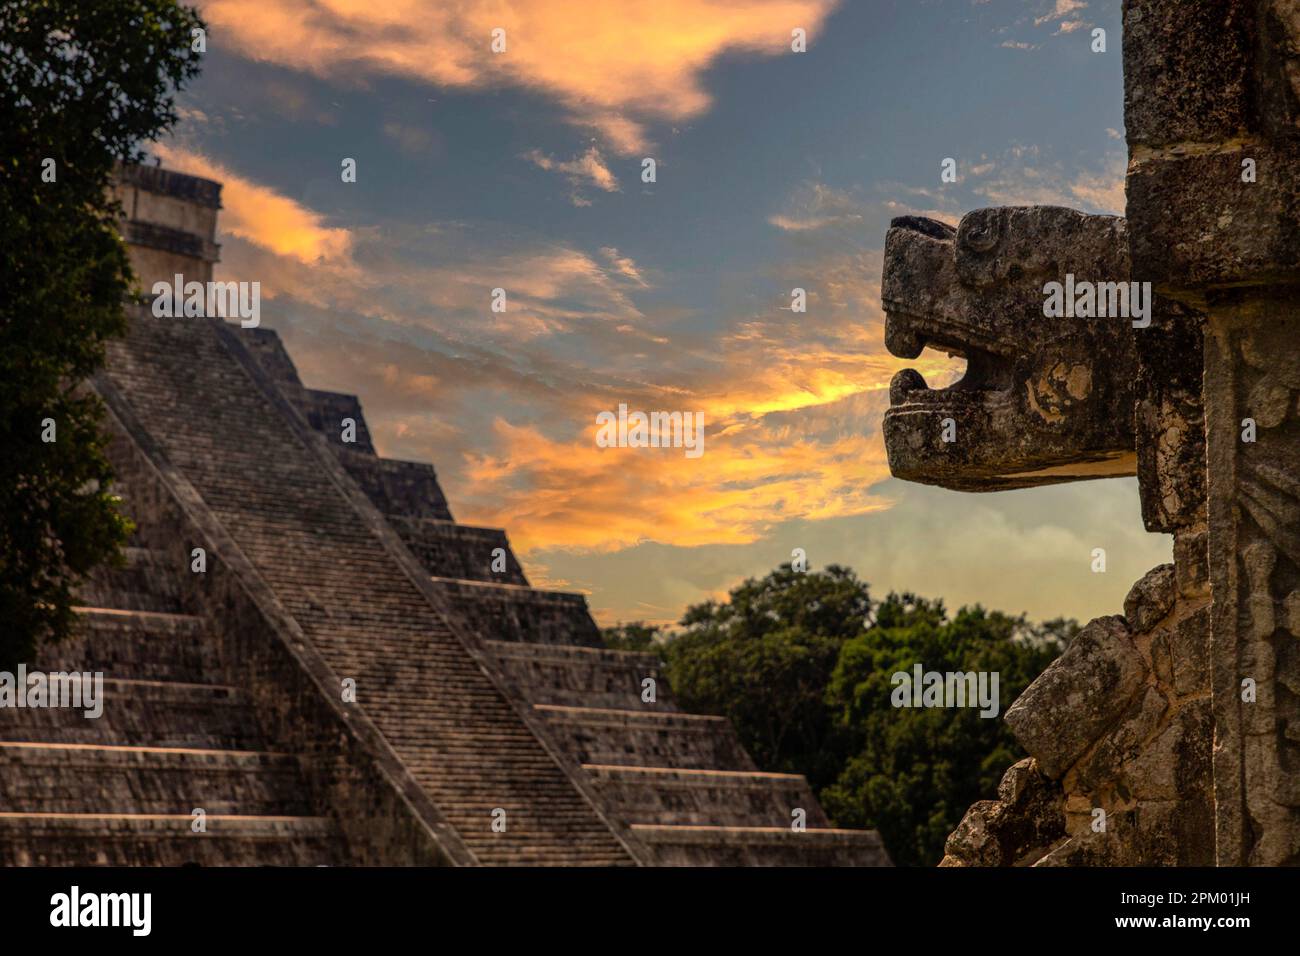 Enjoying the pyramid of Chichen itza from the platform of eagles and jaguars with the god Kukulcan, the feathered serpent of the Mayan civilization. Stock Photo